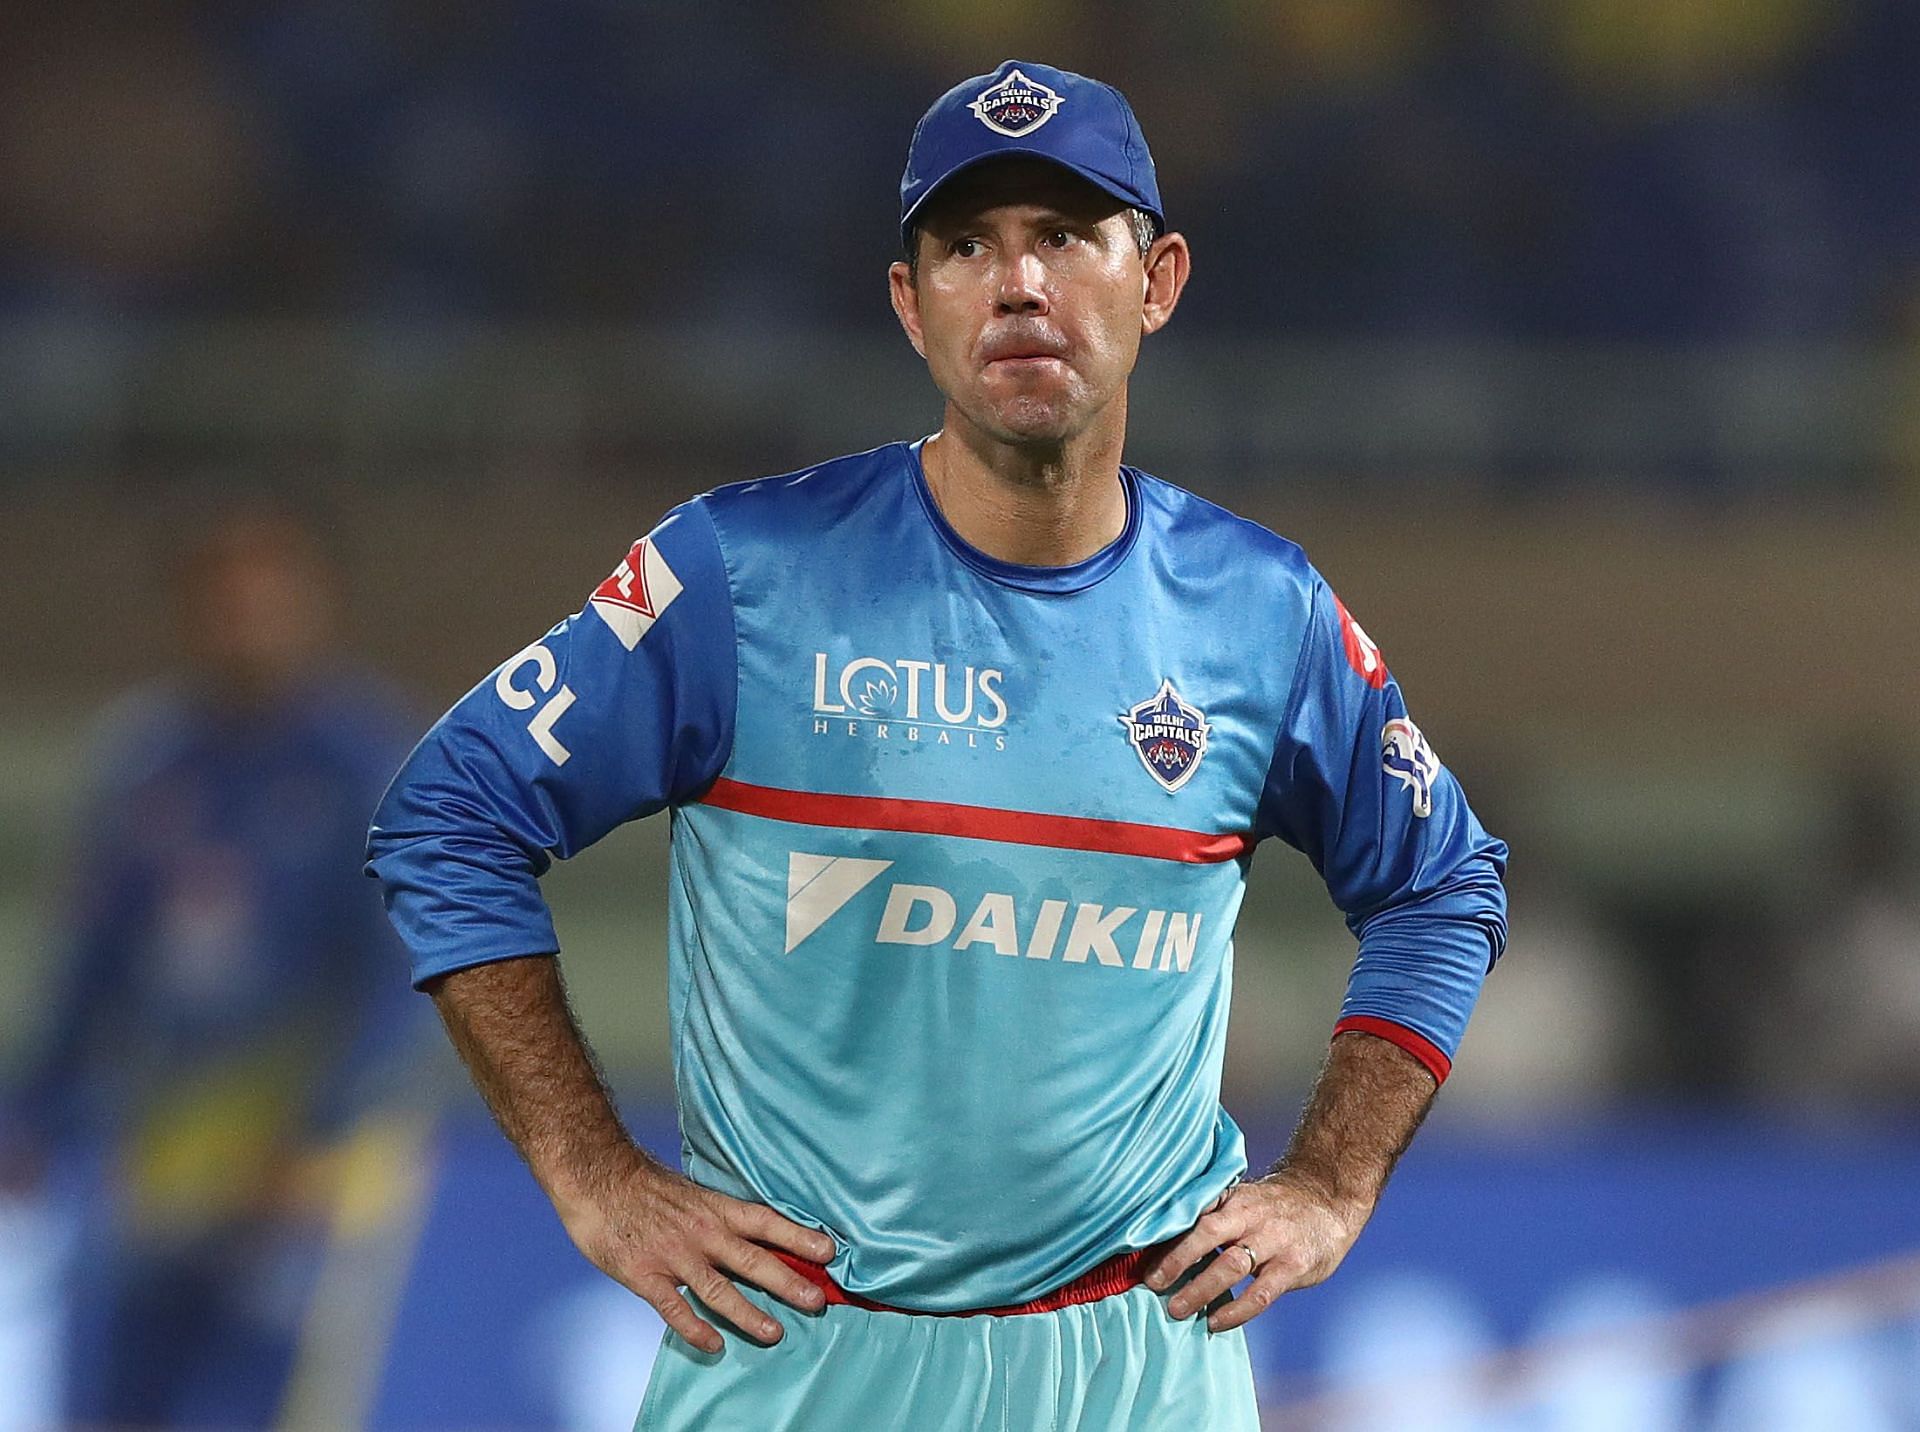 Ponting is also the head coach of Delhi Capitals in the IPL.